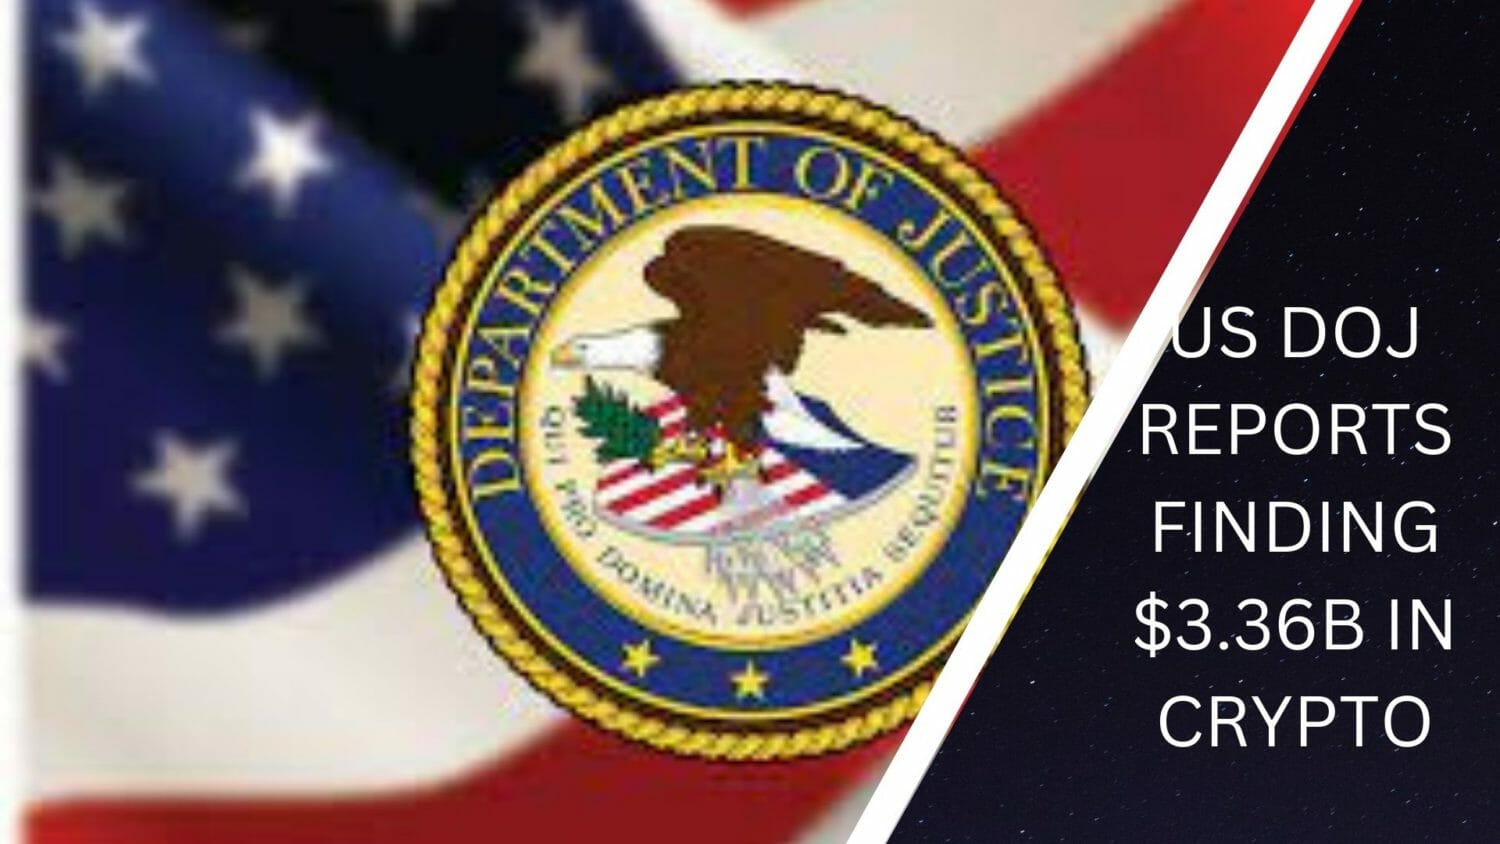 Us Doj Reports Finding $3.36B In Cryptocurrency